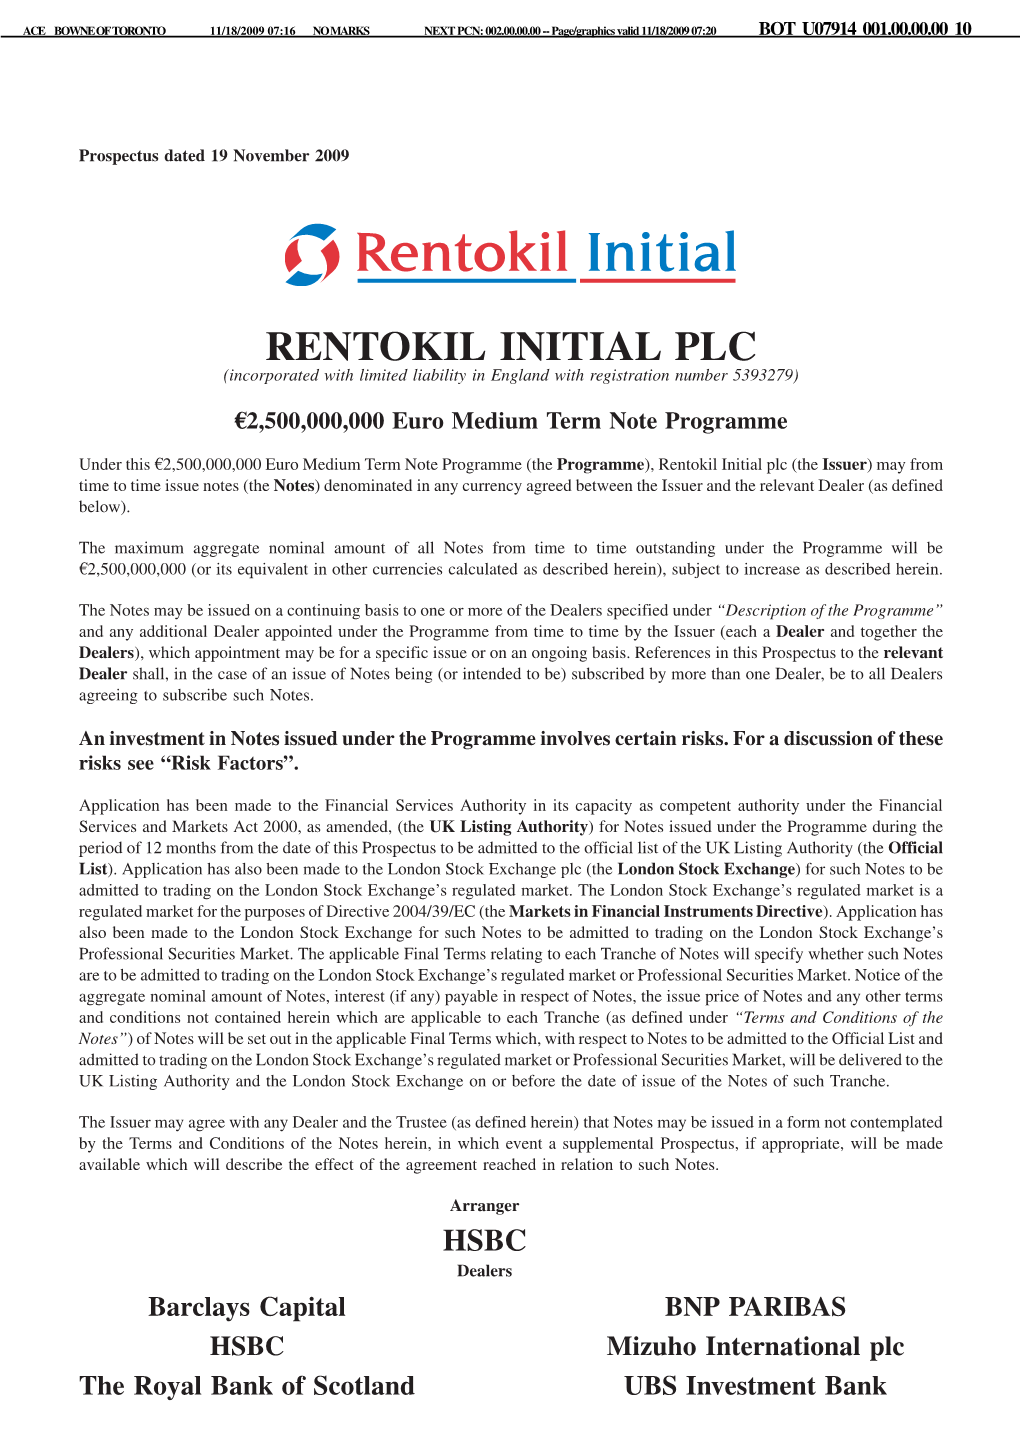 RENTOKIL INITIAL PLC (Incorporated with Limited Liability in England with Registration Number 5393279)